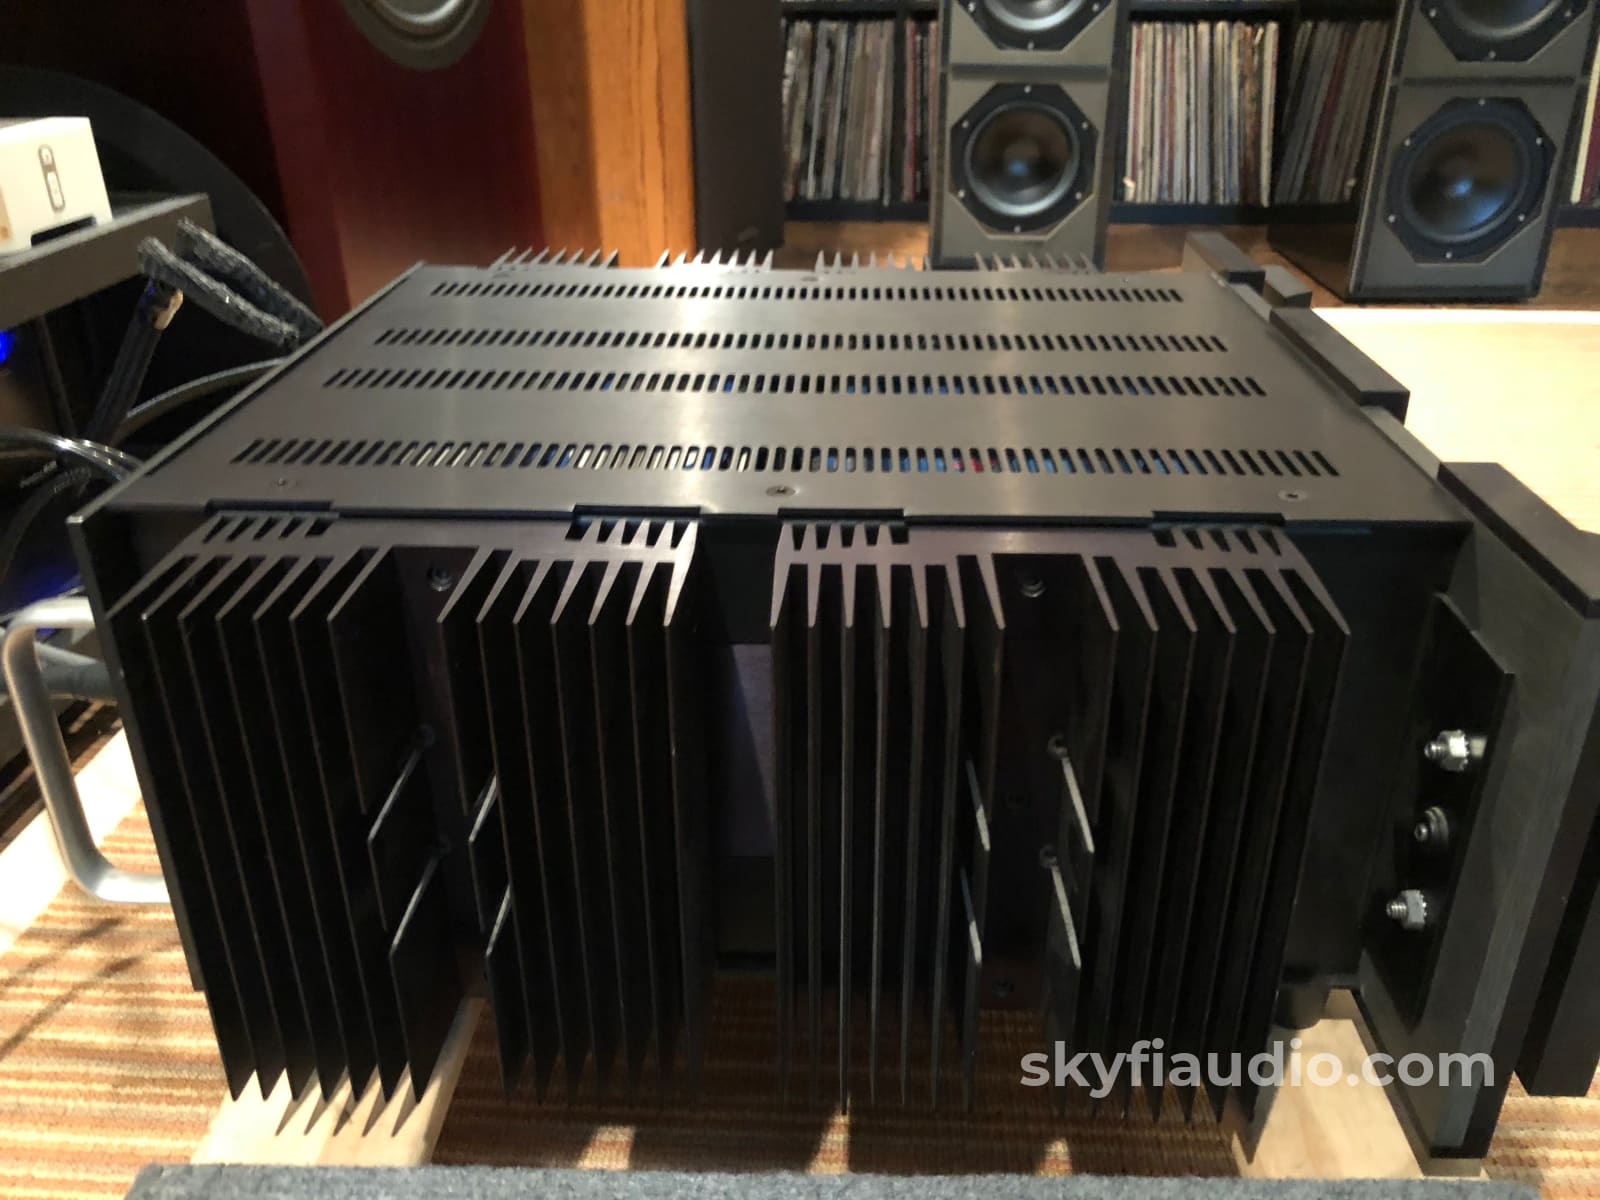 Krell Ksa-200S 200W Solid State Amplifier - Just Serviced And Perfect